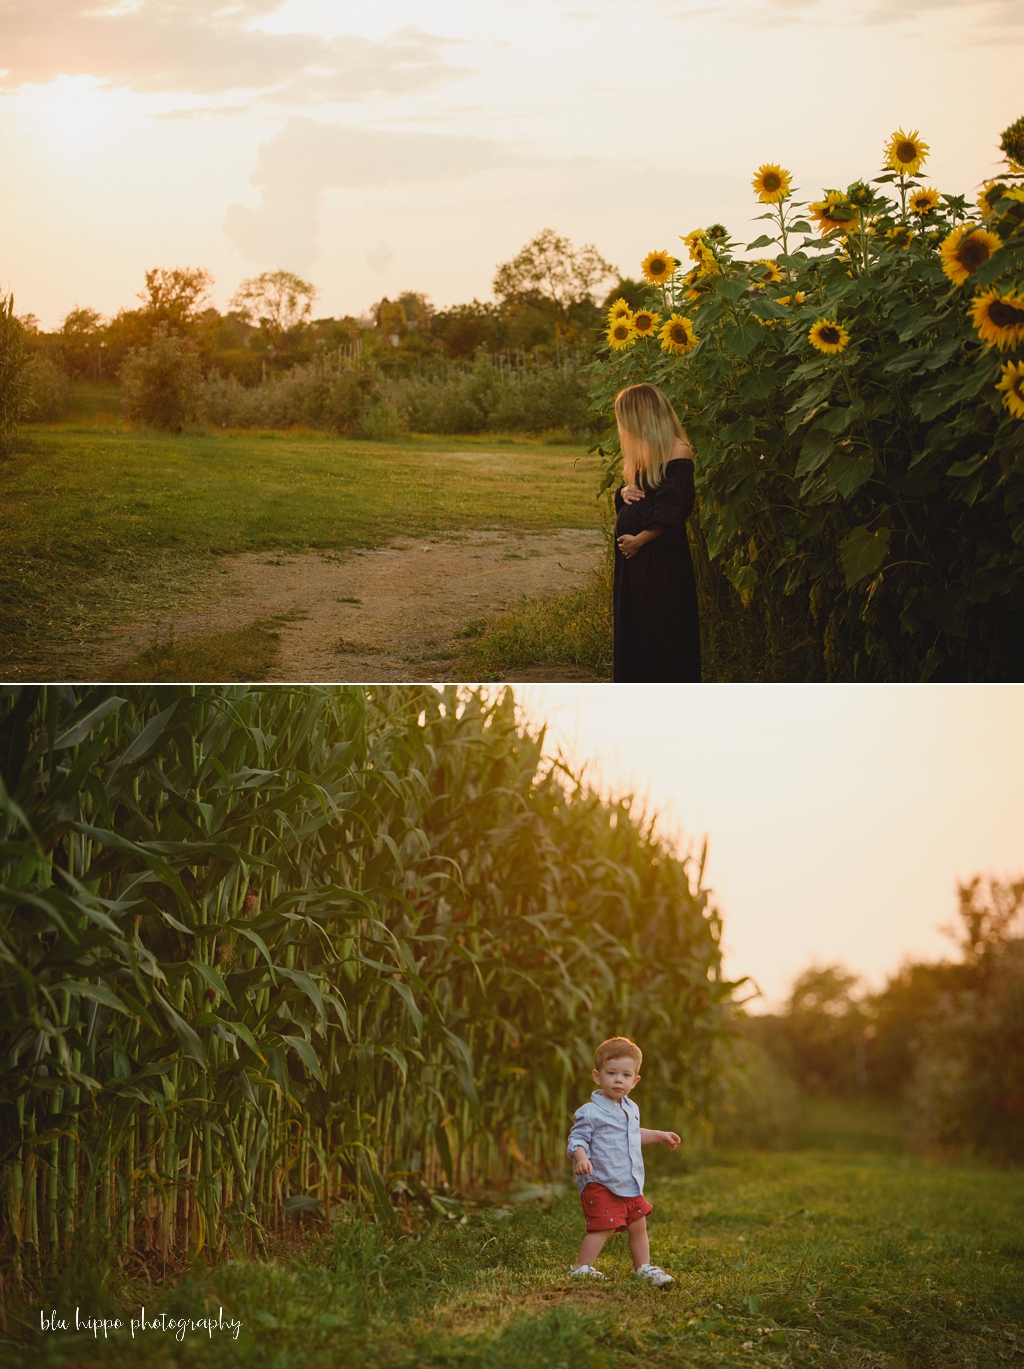 Maternity Photography pittsburgh 